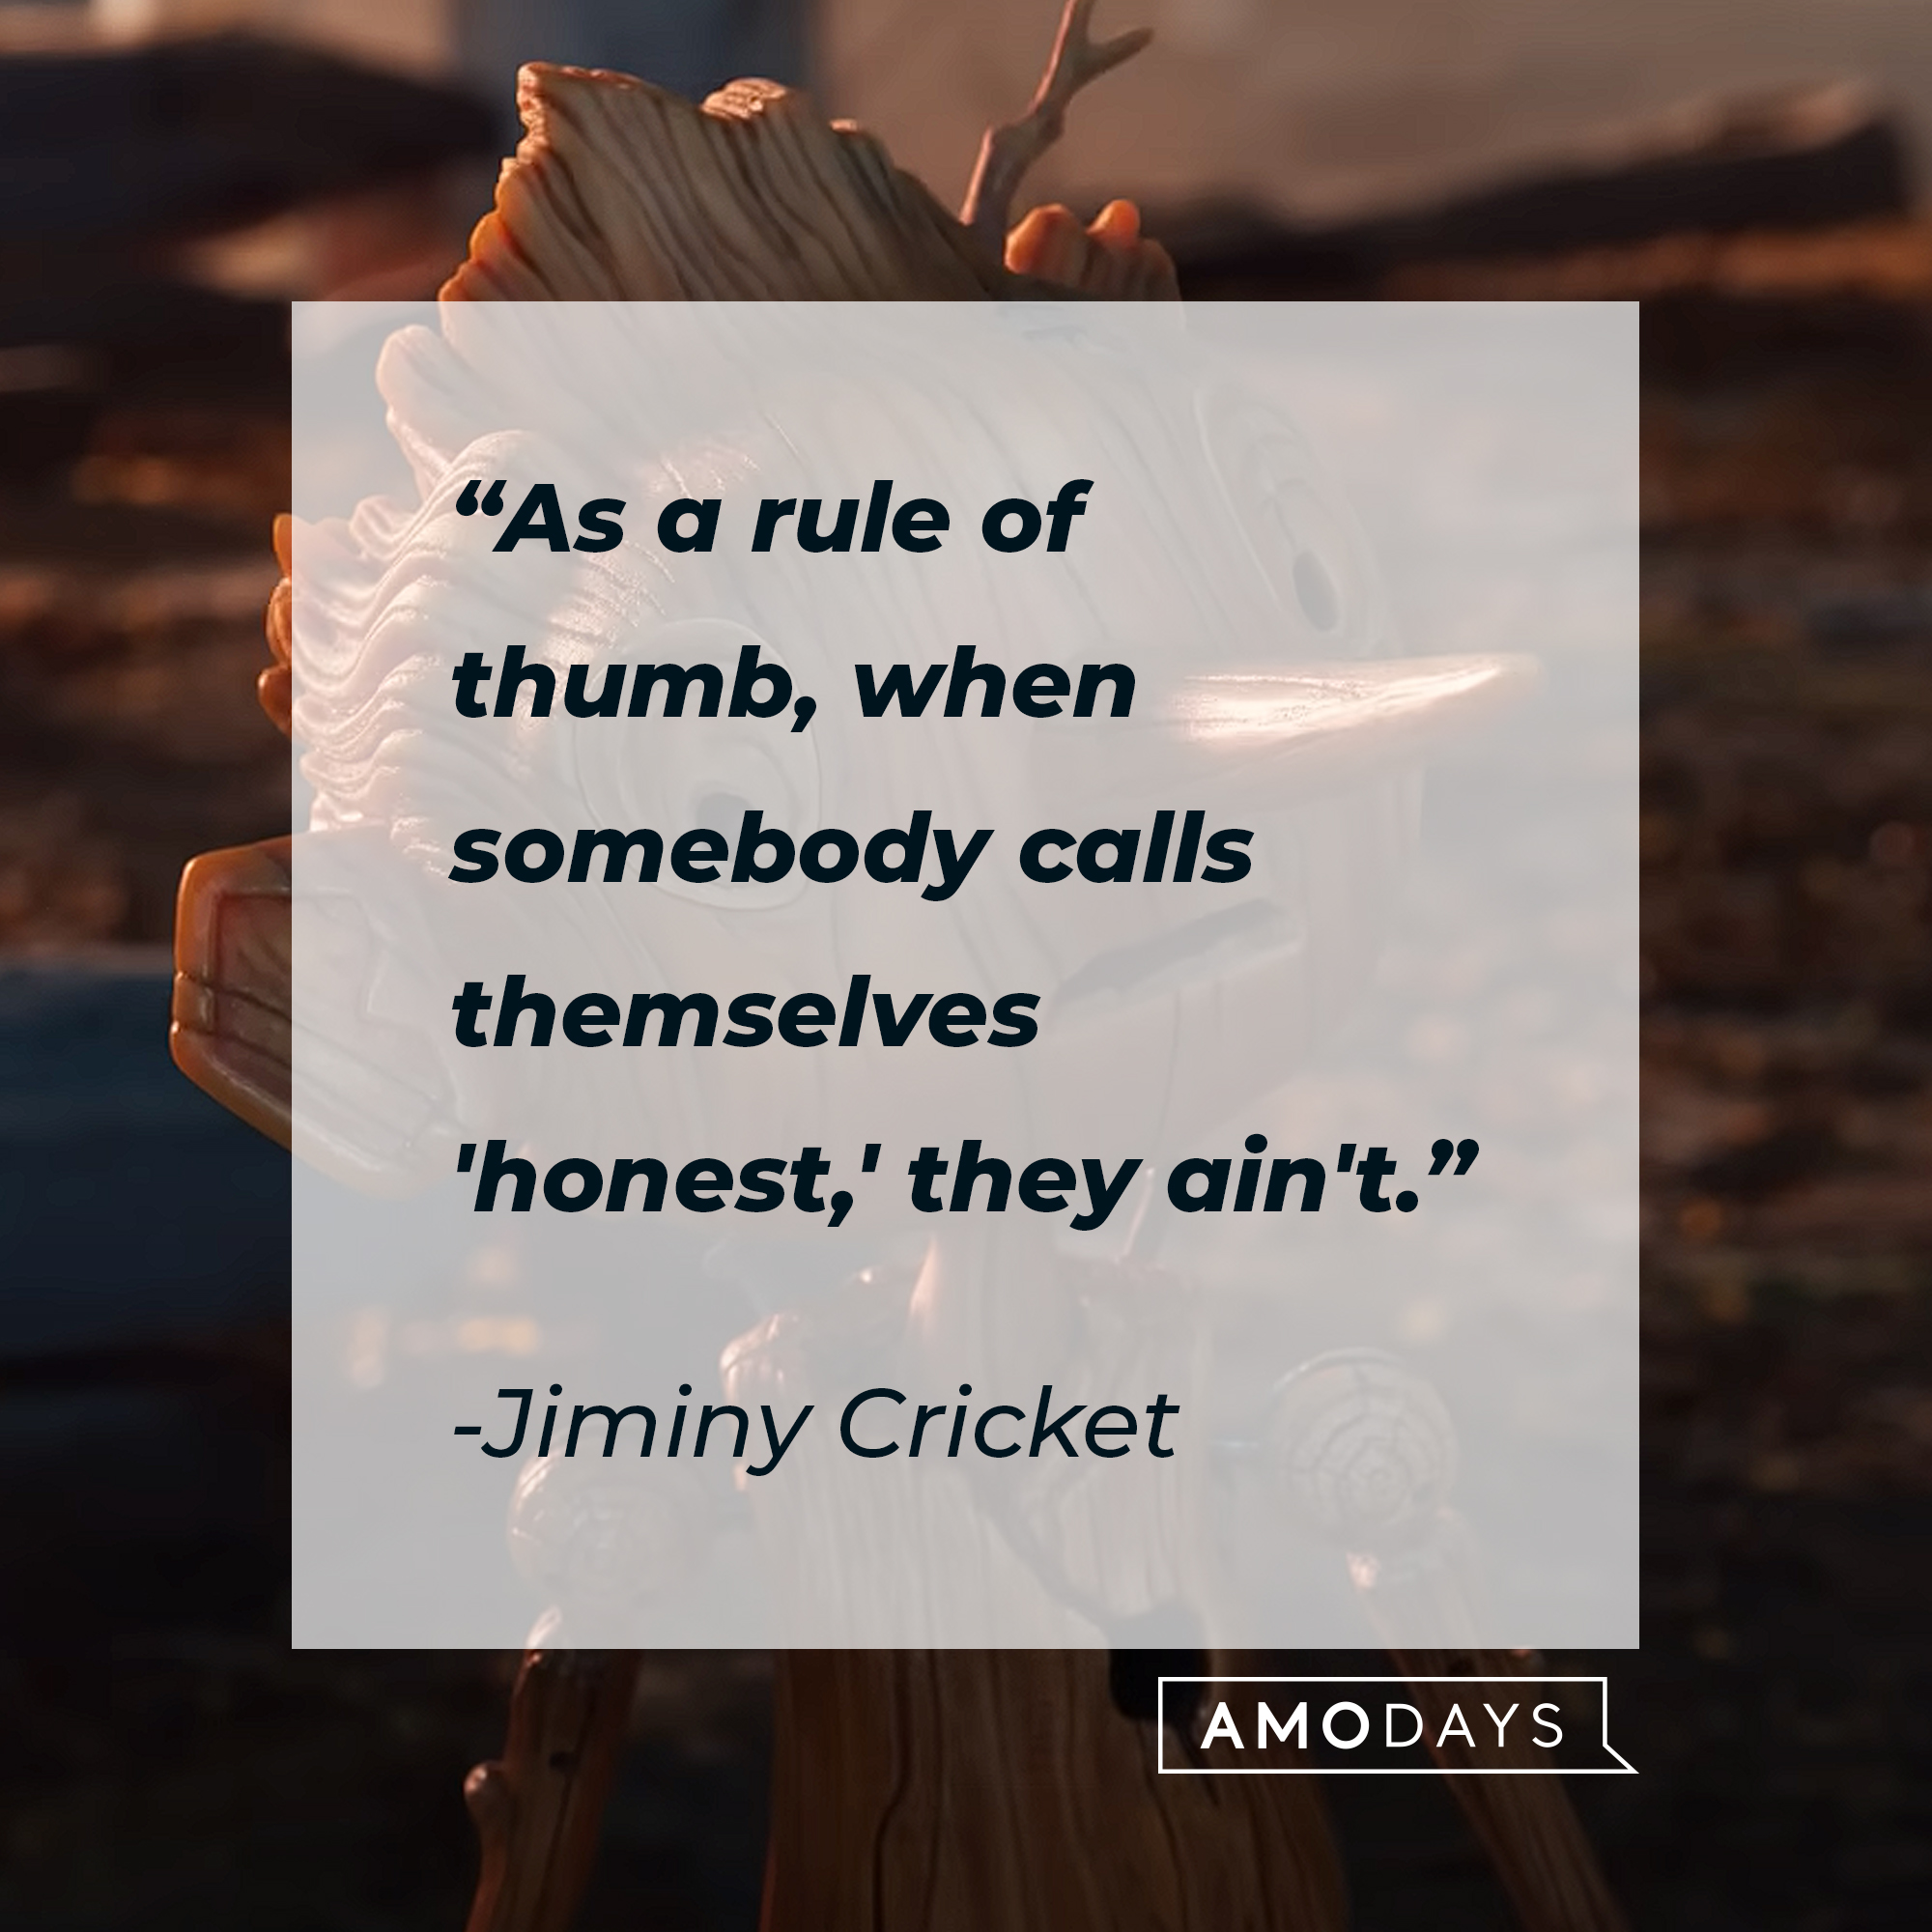 Jiminy Cricket's quote: "As a rule of thumb, when somebody calls themselves 'honest,' they ain't." | Image: AmoDays